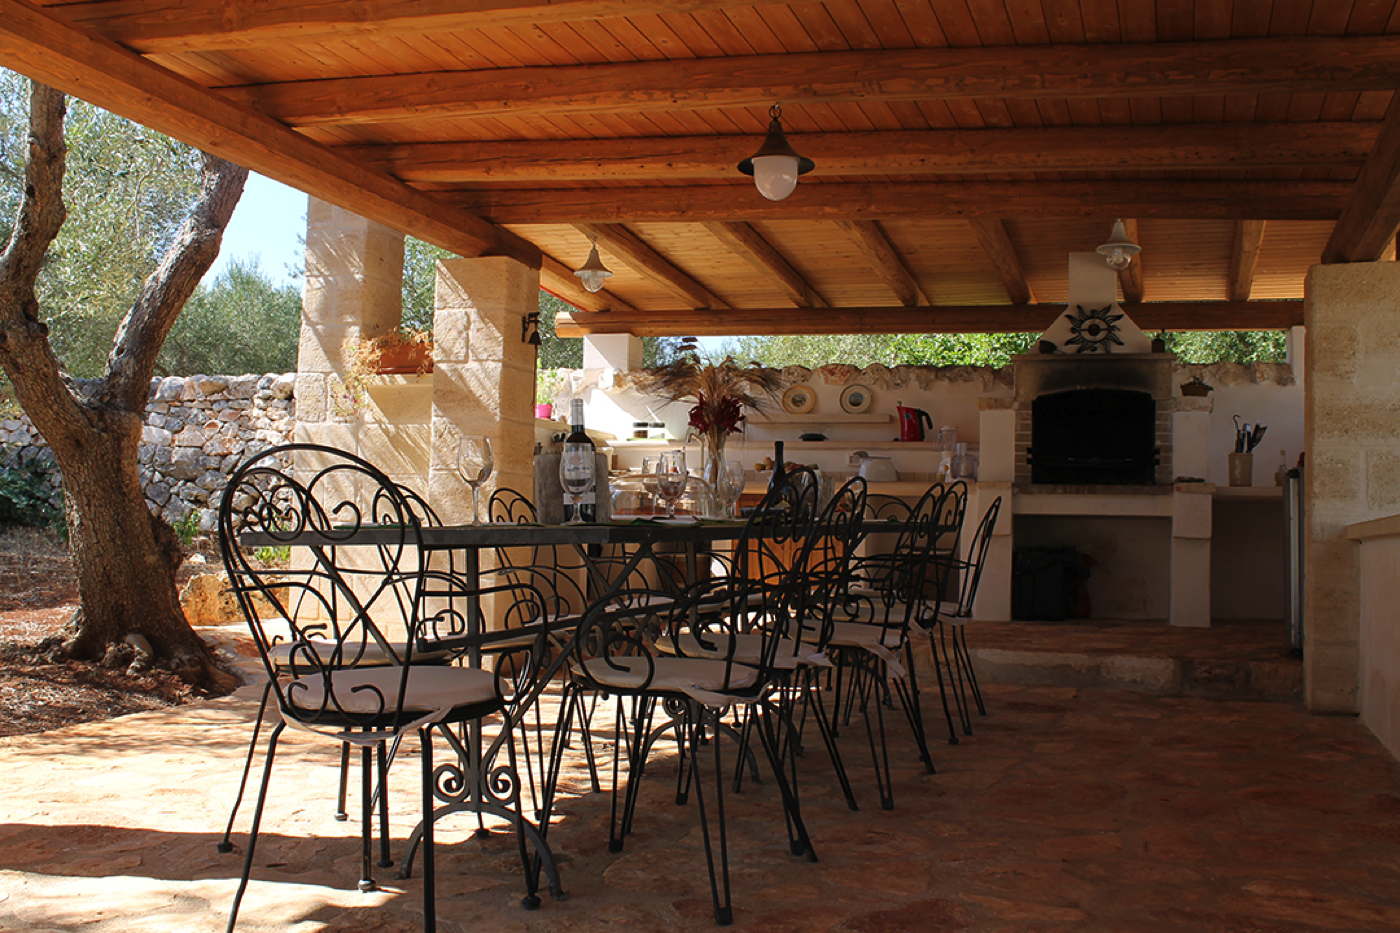 Typical Puglian trullo with pool for holiday rental in Italy